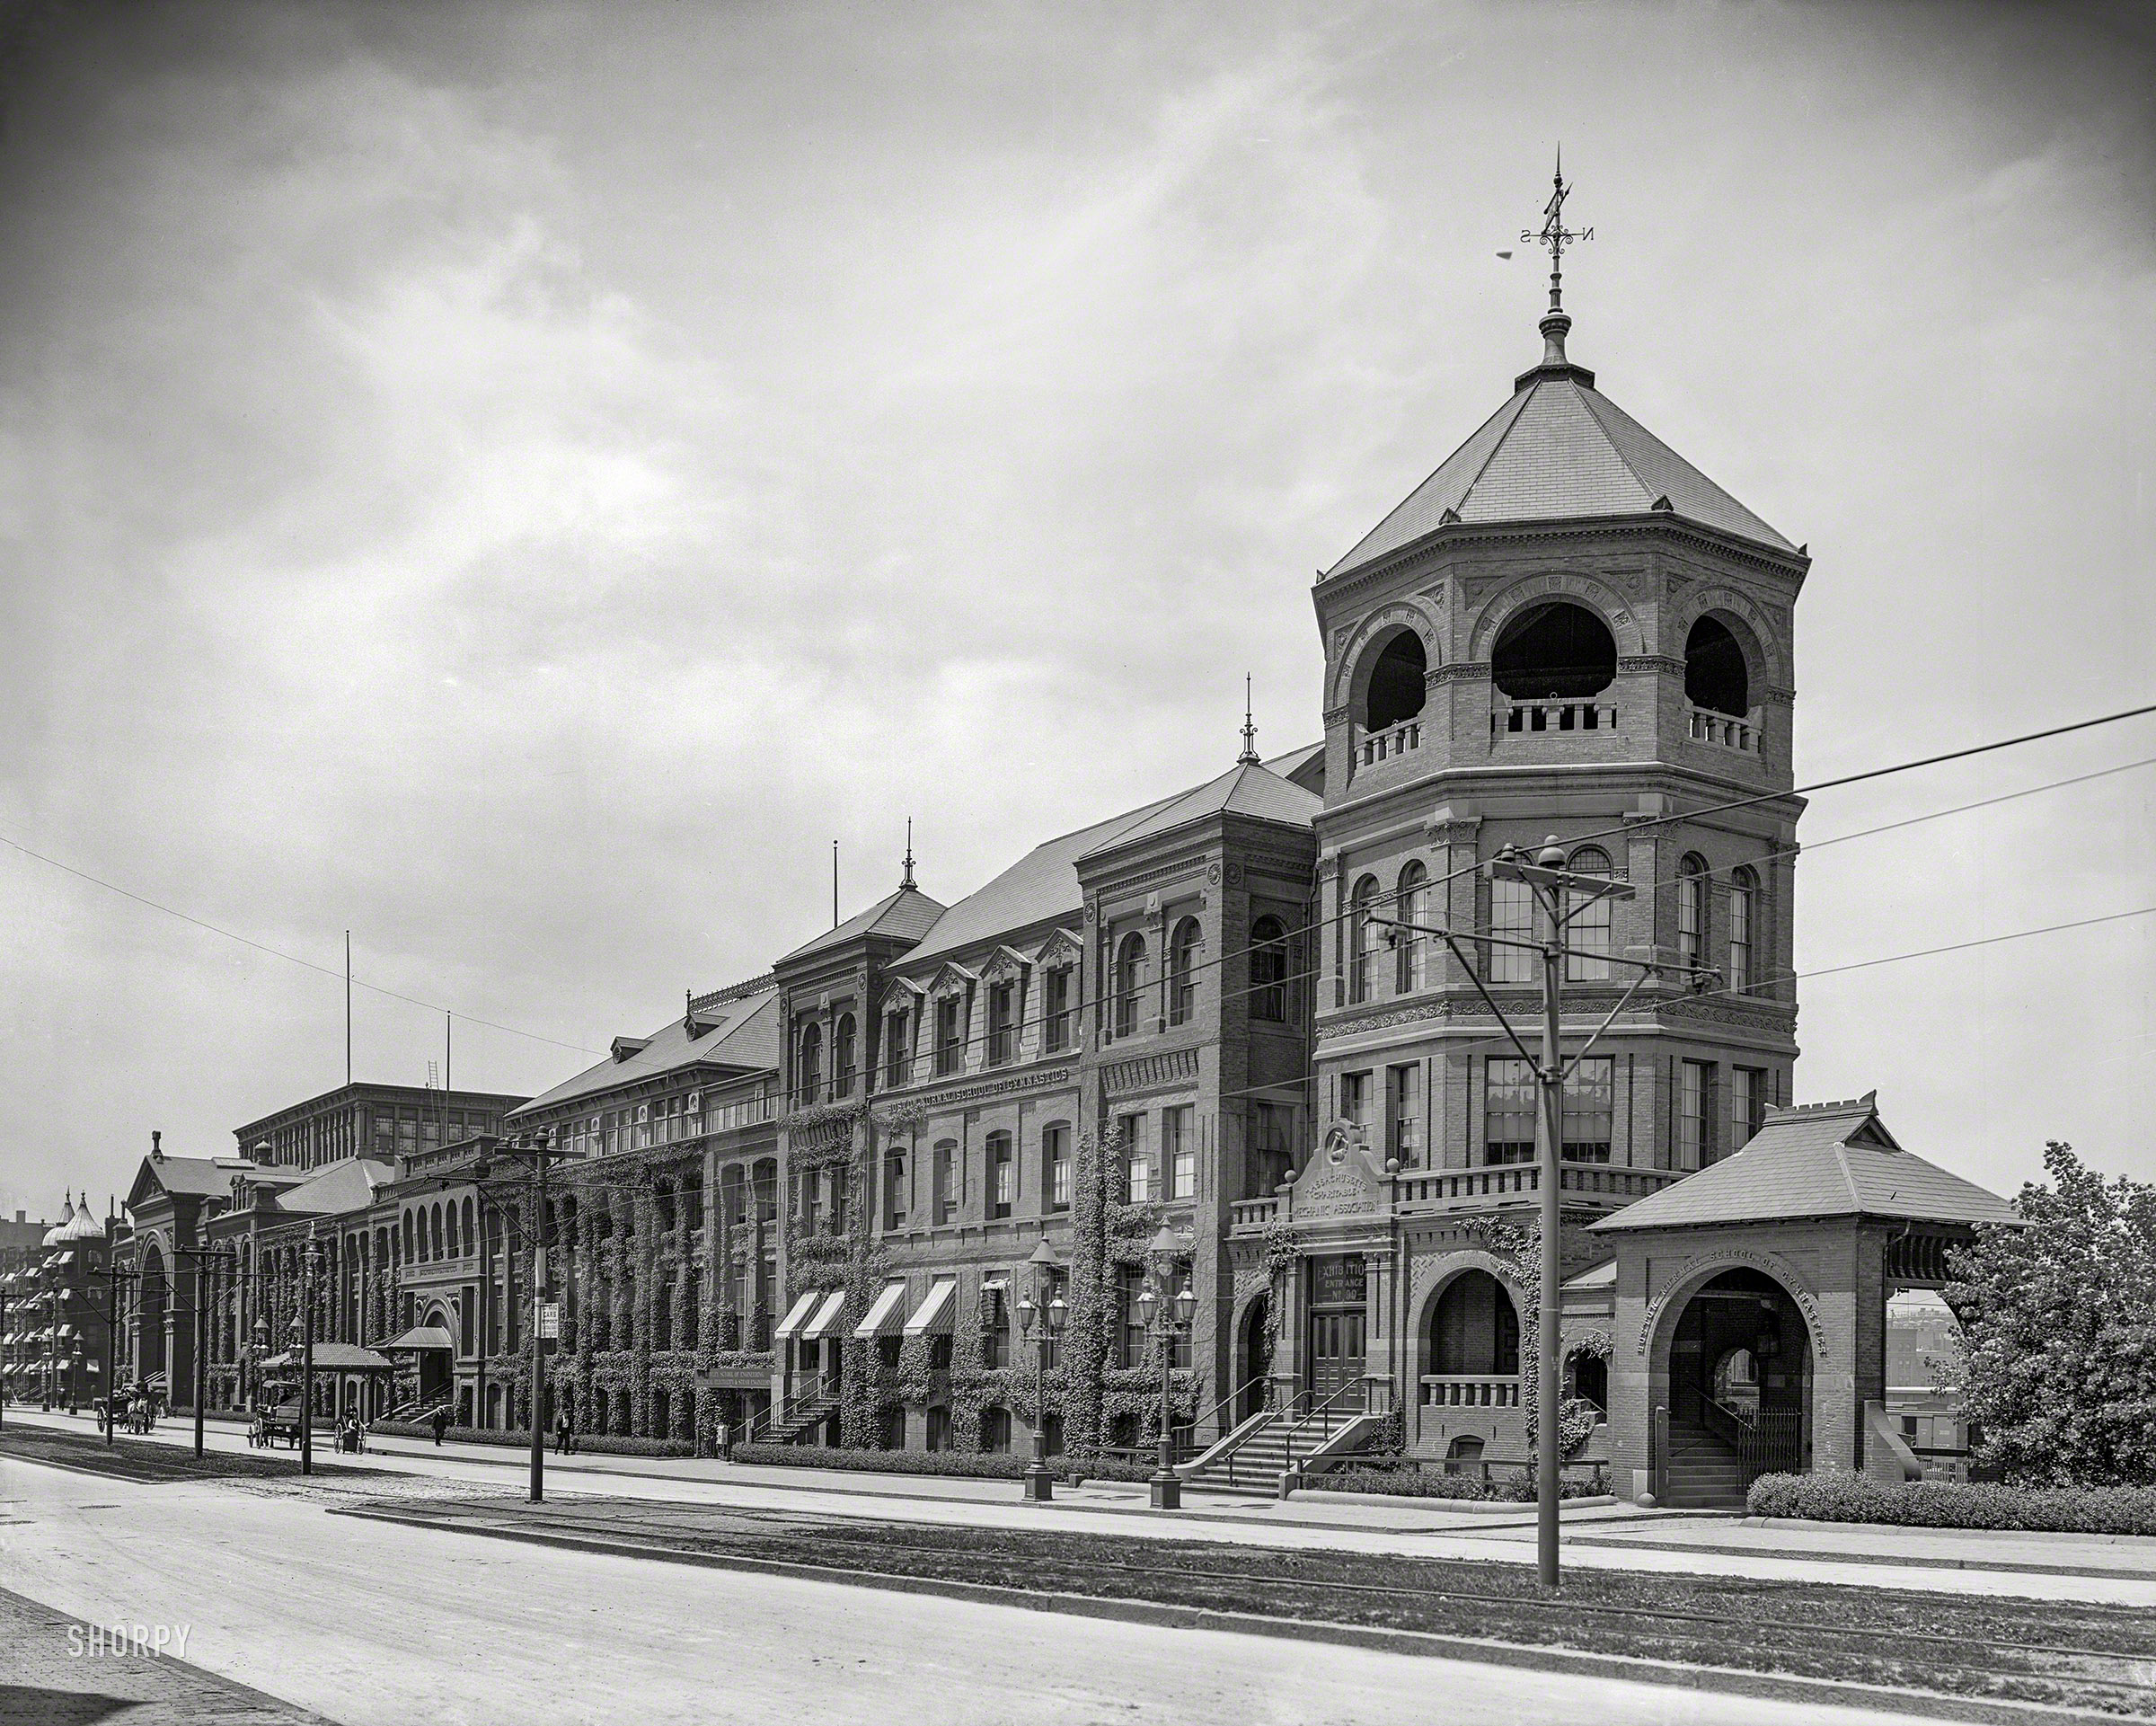 Boston circa 1906. "Mechanics Hall, Huntington Avenue." Demolished in 1959 to make way for Prudential Center. 8x10 inch glass negative. View full size.